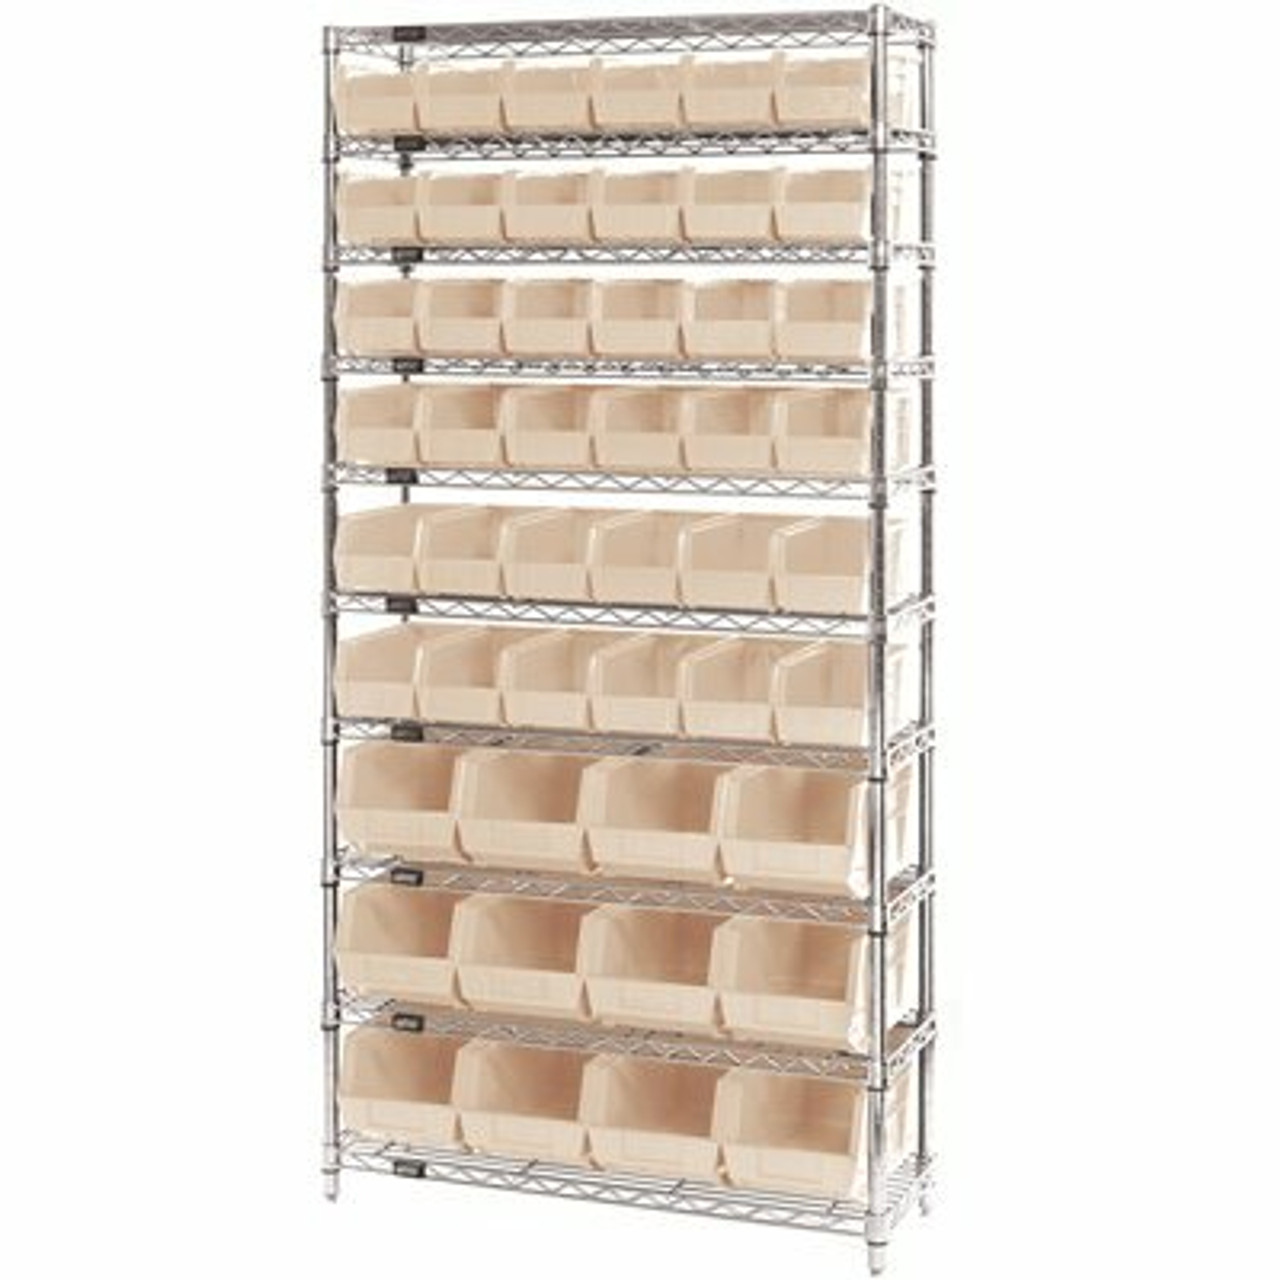 Quantum Storage Systems Giant Open Hopper 36 In. X 14 In. X 74 In. Wire Chrome Heavy Duty 10-Tier Industrial Shelving Unit - 308241560